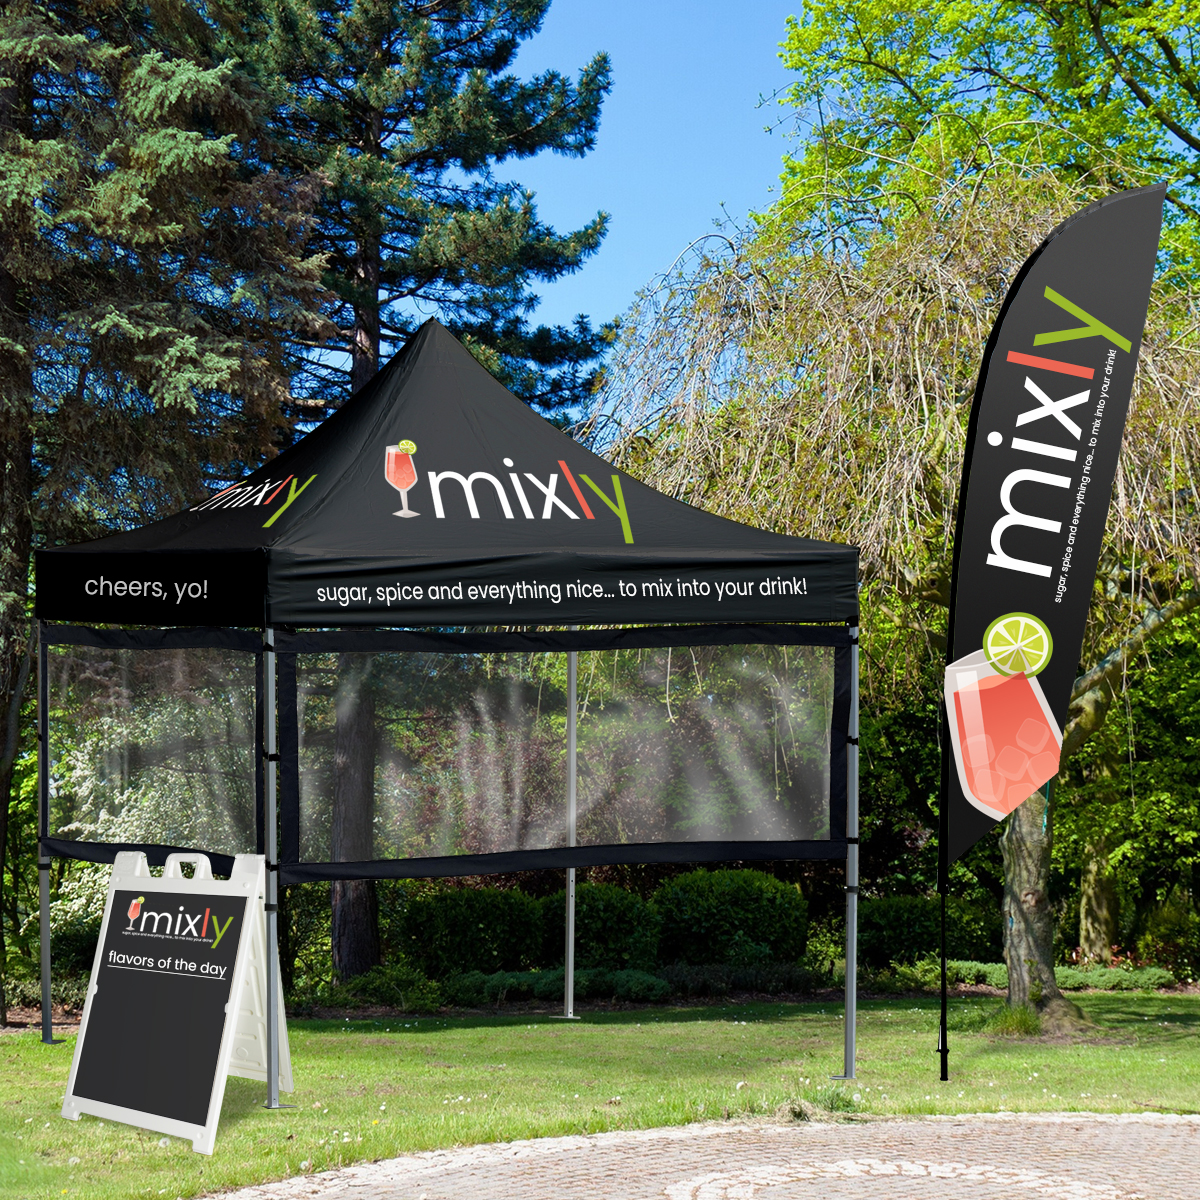 Custom Printed Canopy Tent with a clear PVC Barrier